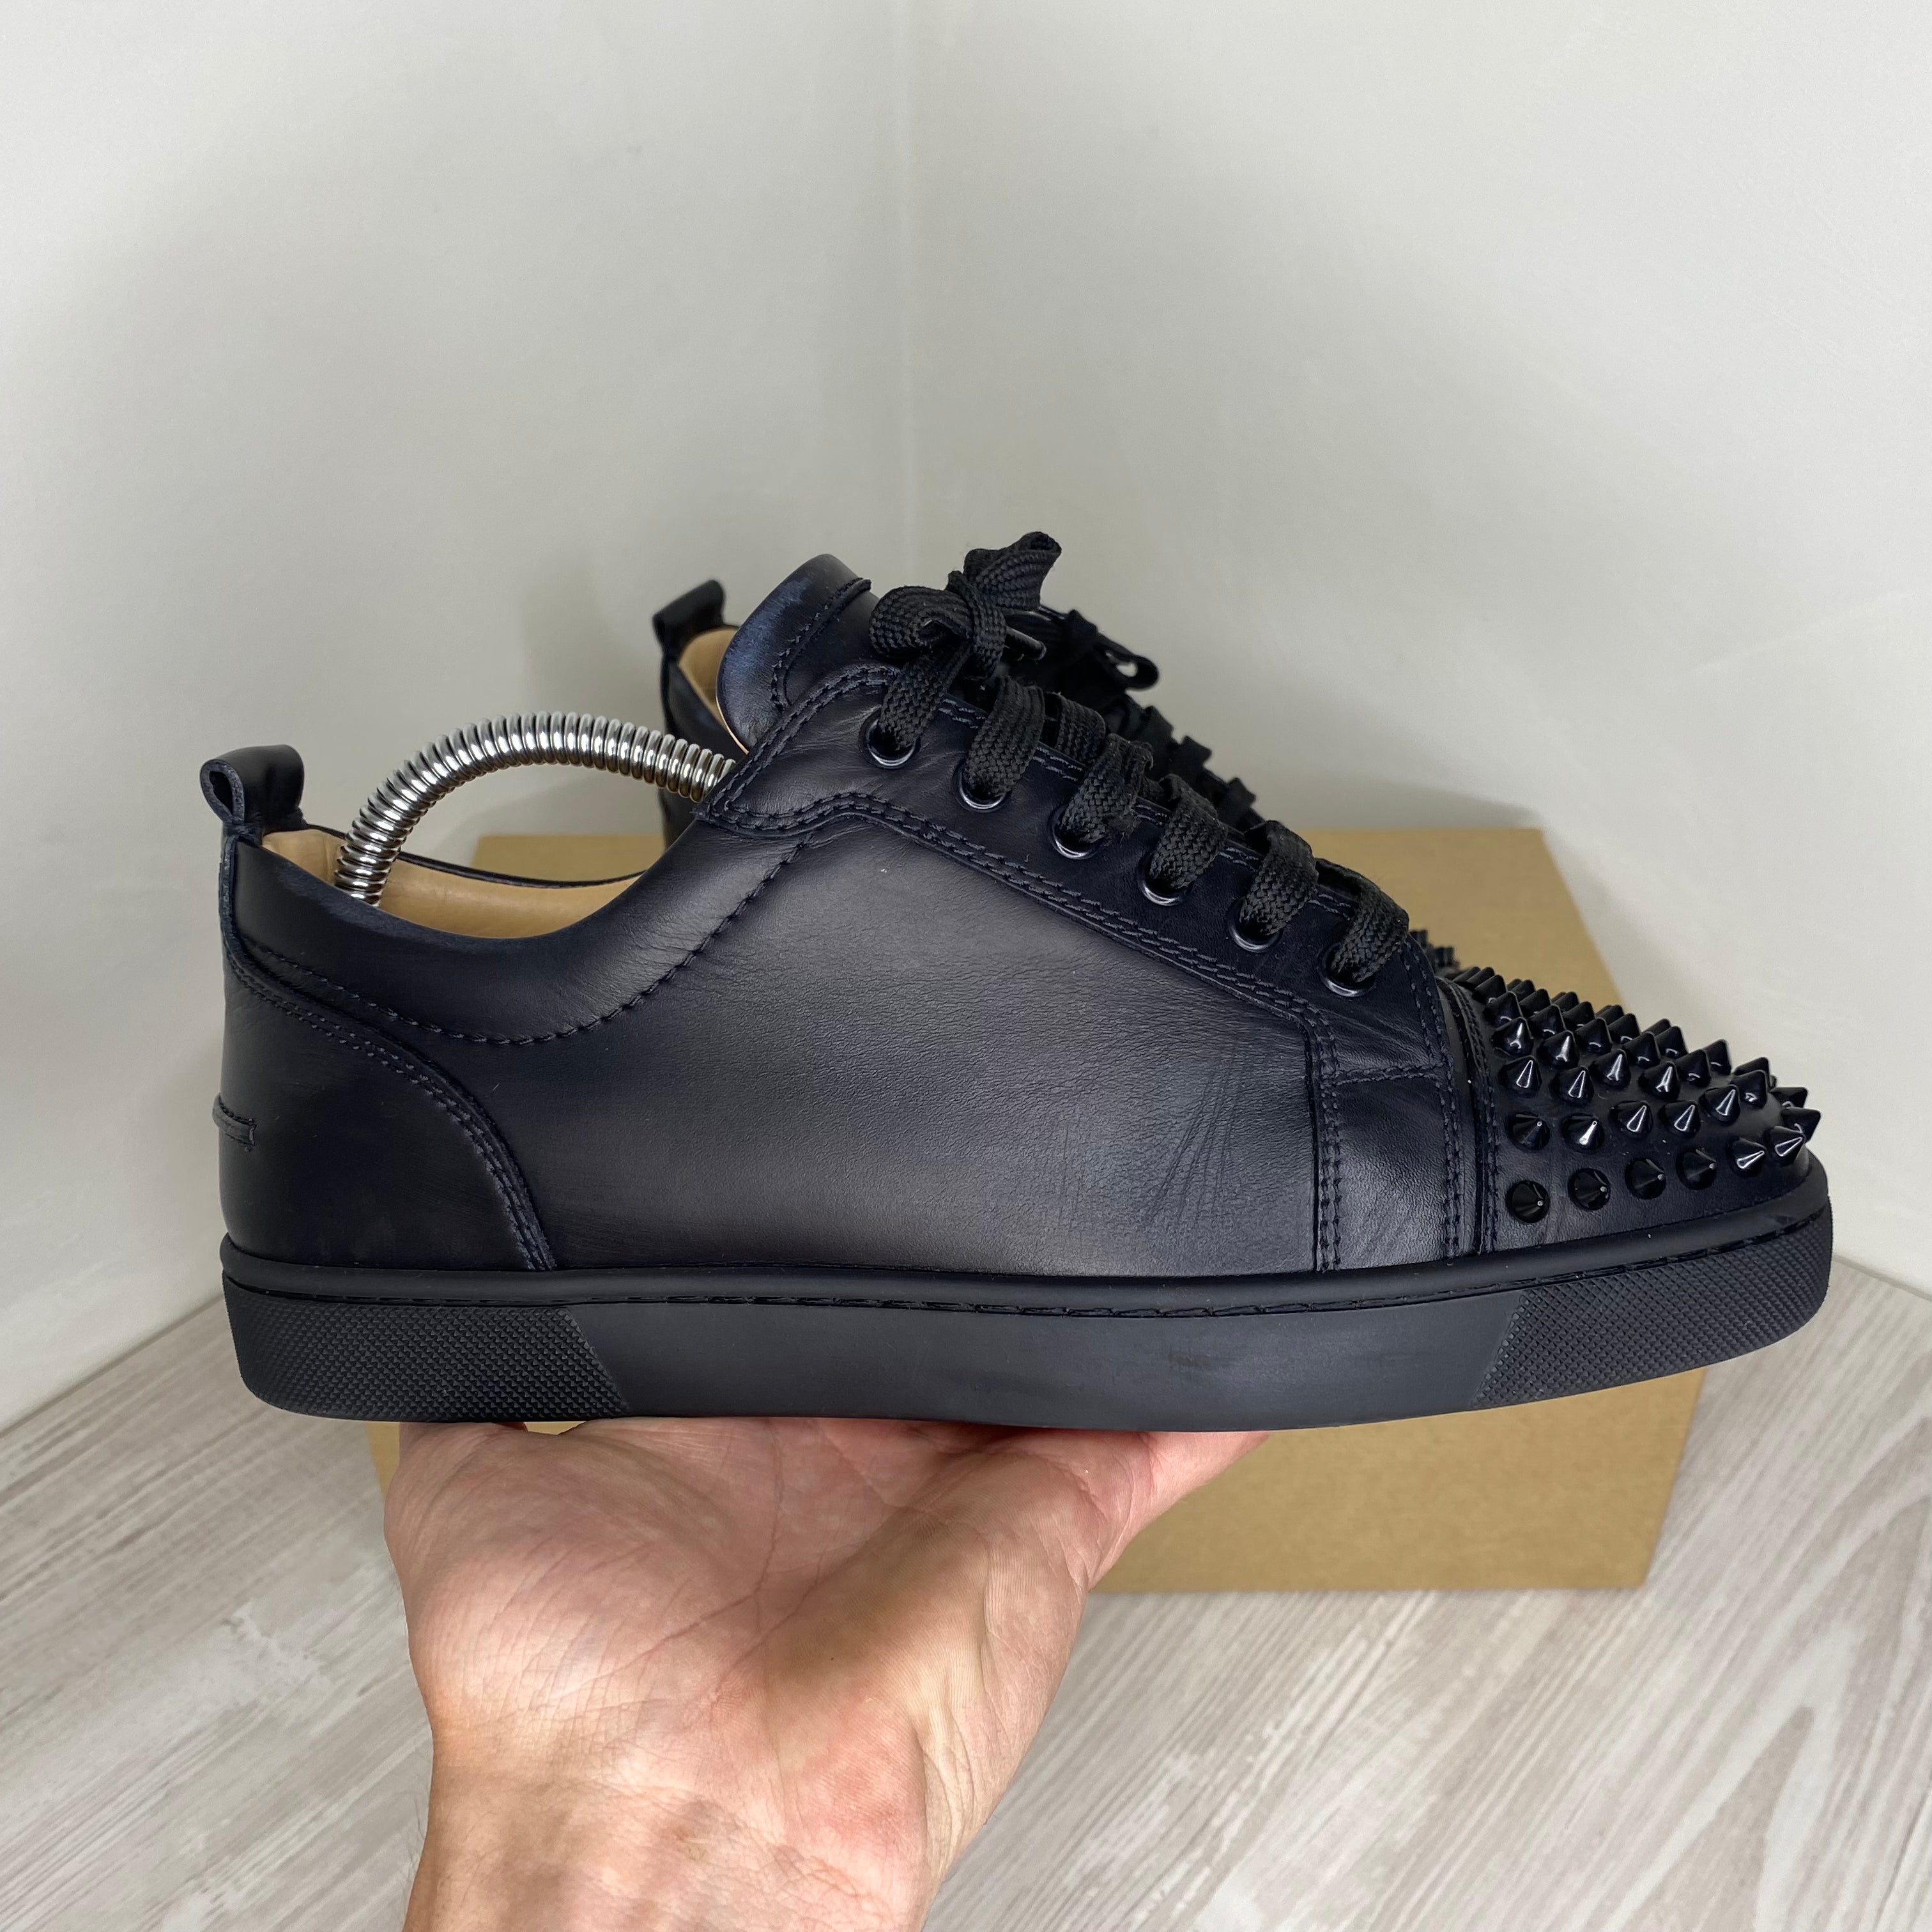 Louboutin Sneakers, 'Black Leather' Junior Spikes Herre Snea – DelsouX Universe